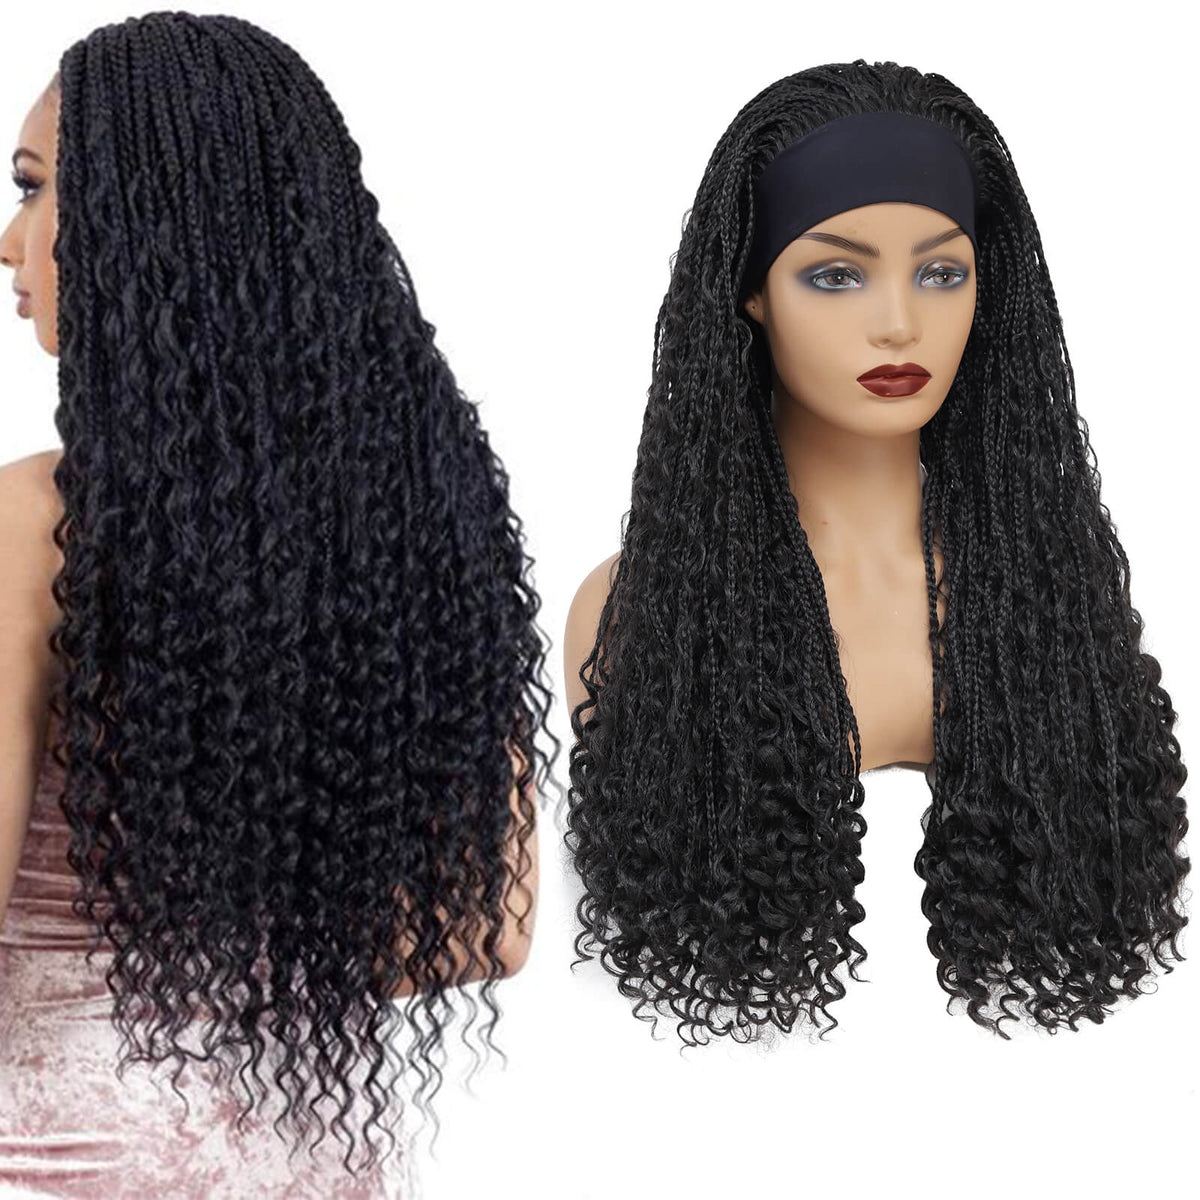 Headband Braided Wigs With Free Tress Box Braided Wigs for Black Women Long Micro Braids Wig Black  Color